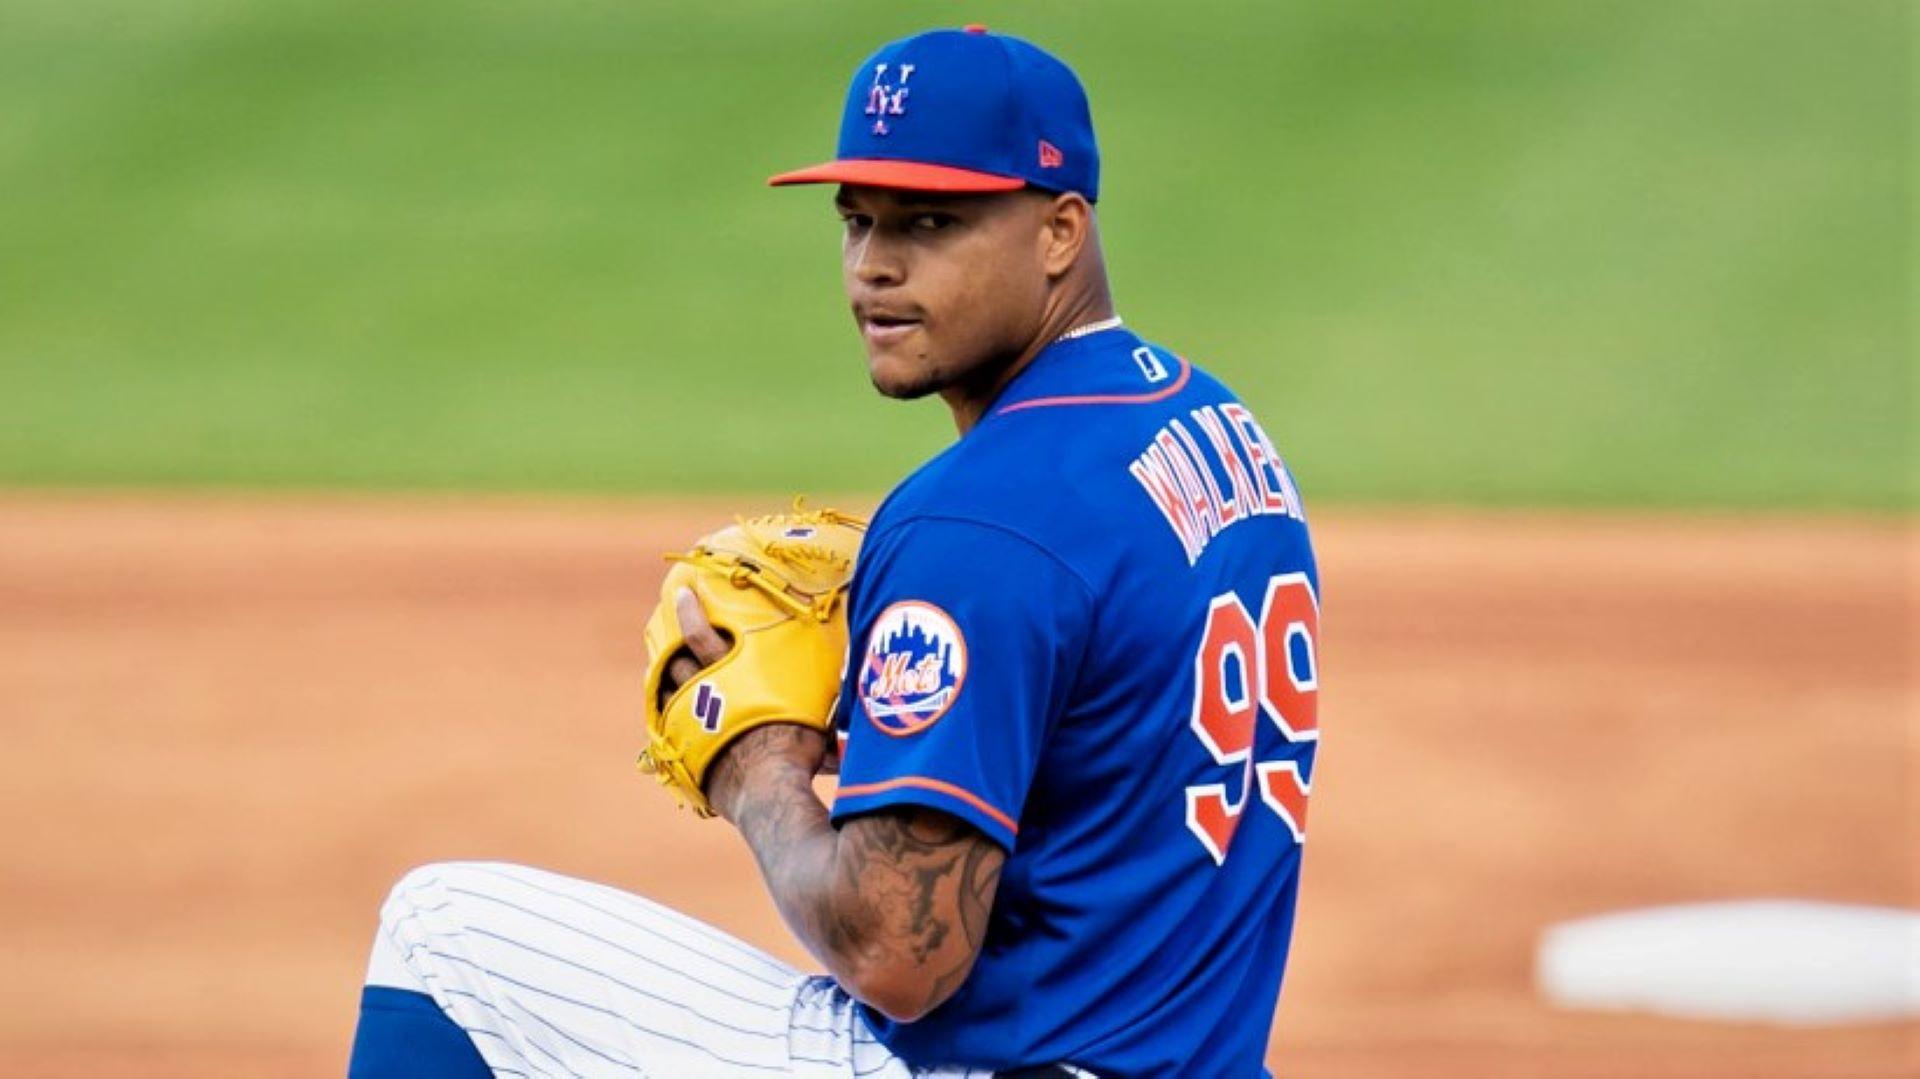 Mar 9, 2021; Port St. Lucie, Florida, USA; New York Mets starting pitcher Taijuan Walker (99) delivers a pitch during the first inning of a spring training game between the St. Louis Cardinals and New York Mets at Clover Park. / Mary Holt-USA TODAY Sports